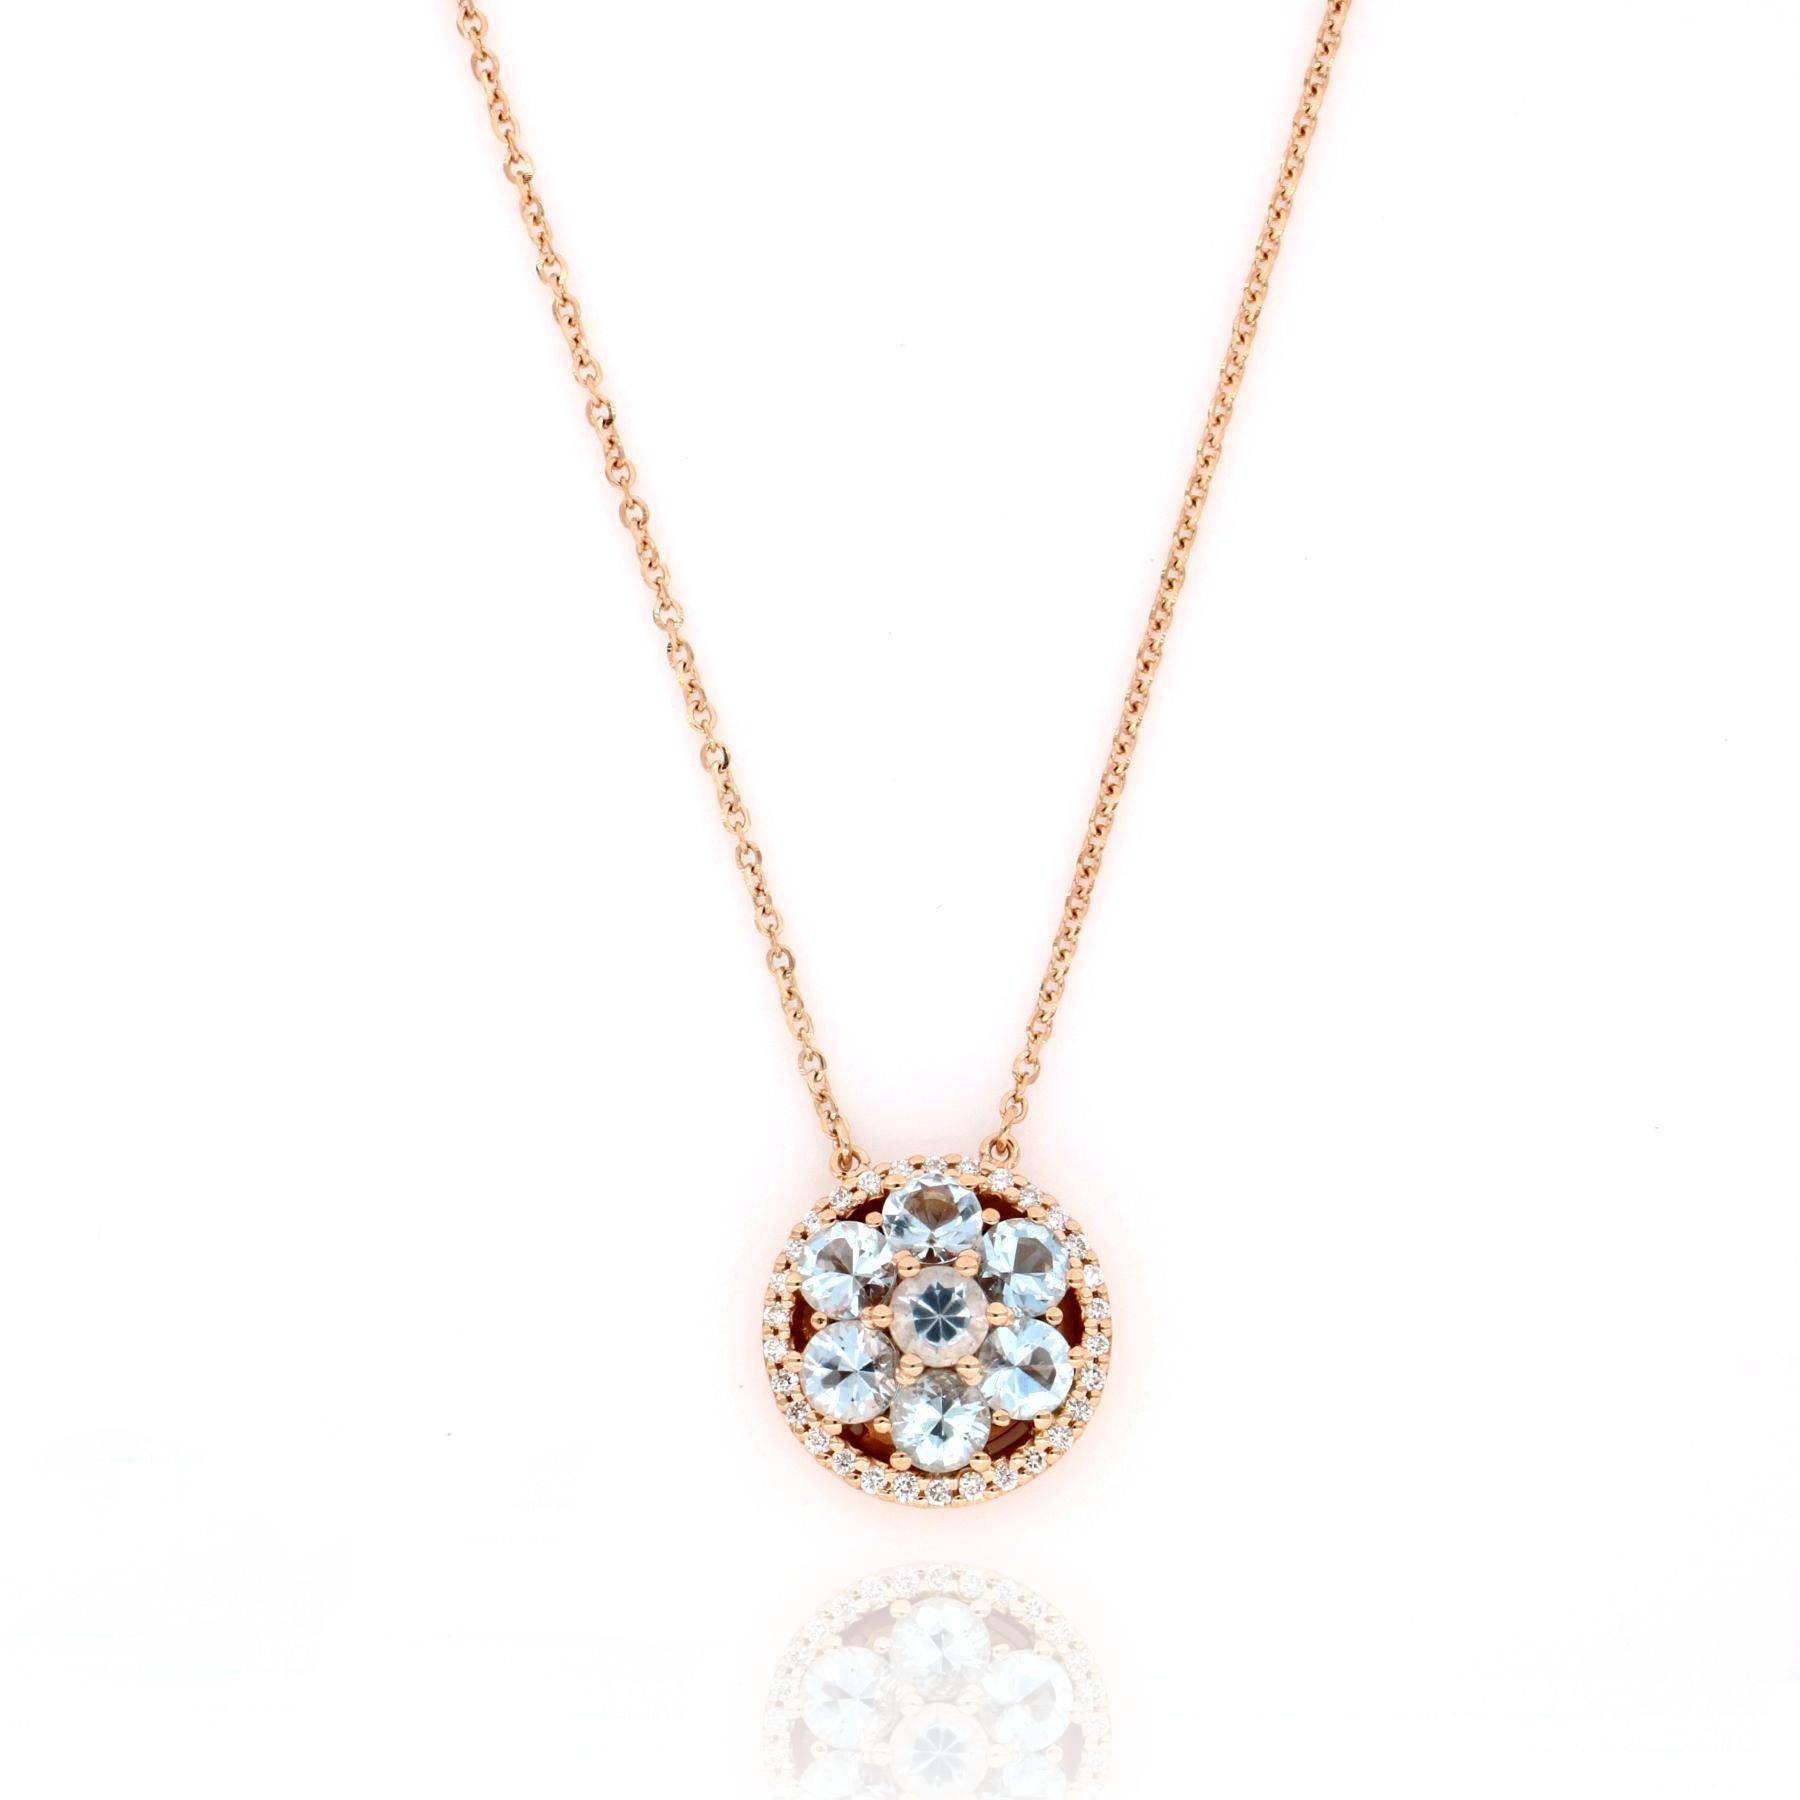 Necklace rose gold with blue topaz and diamonds - GOLD ART